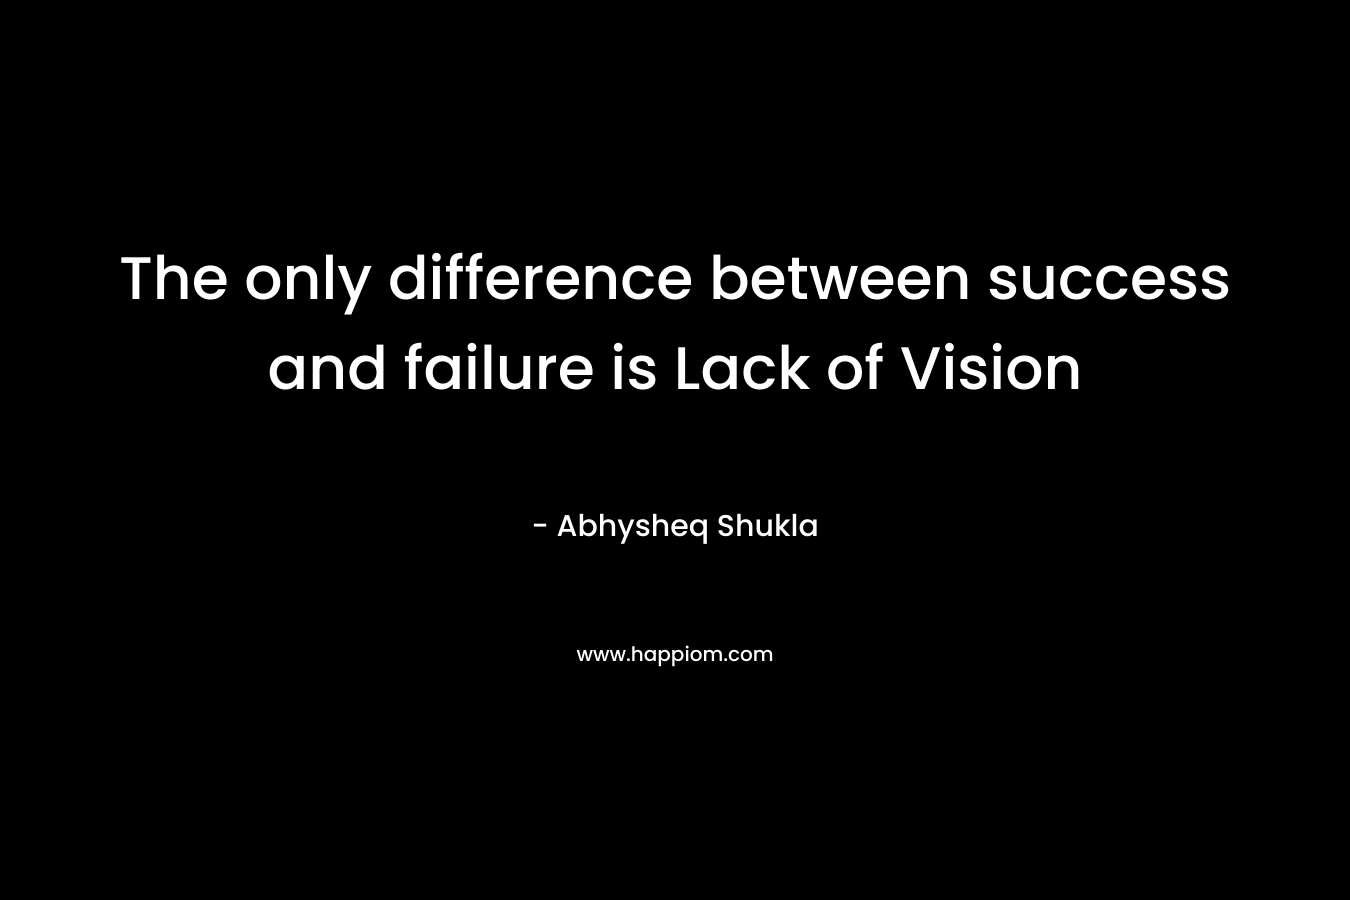 The only difference between success and failure is Lack of Vision